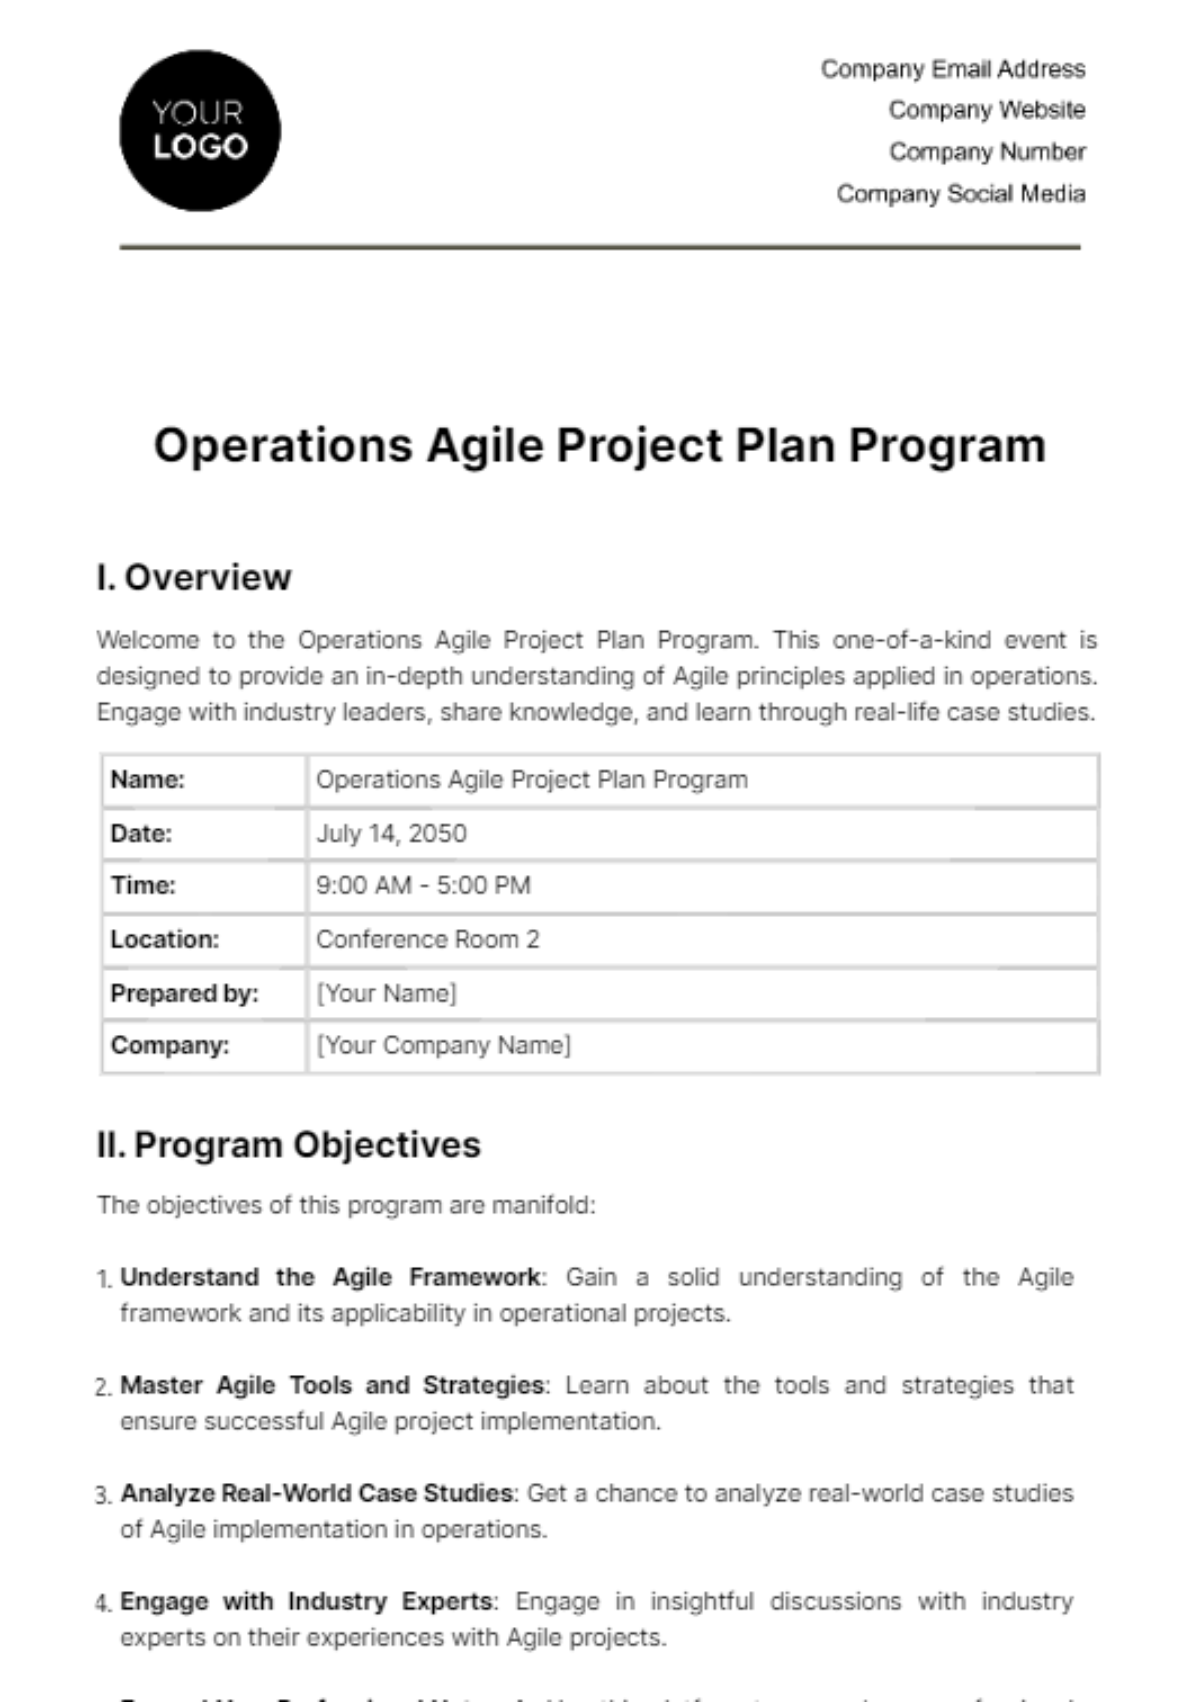 Free Operations Agile Project Plan Program Template